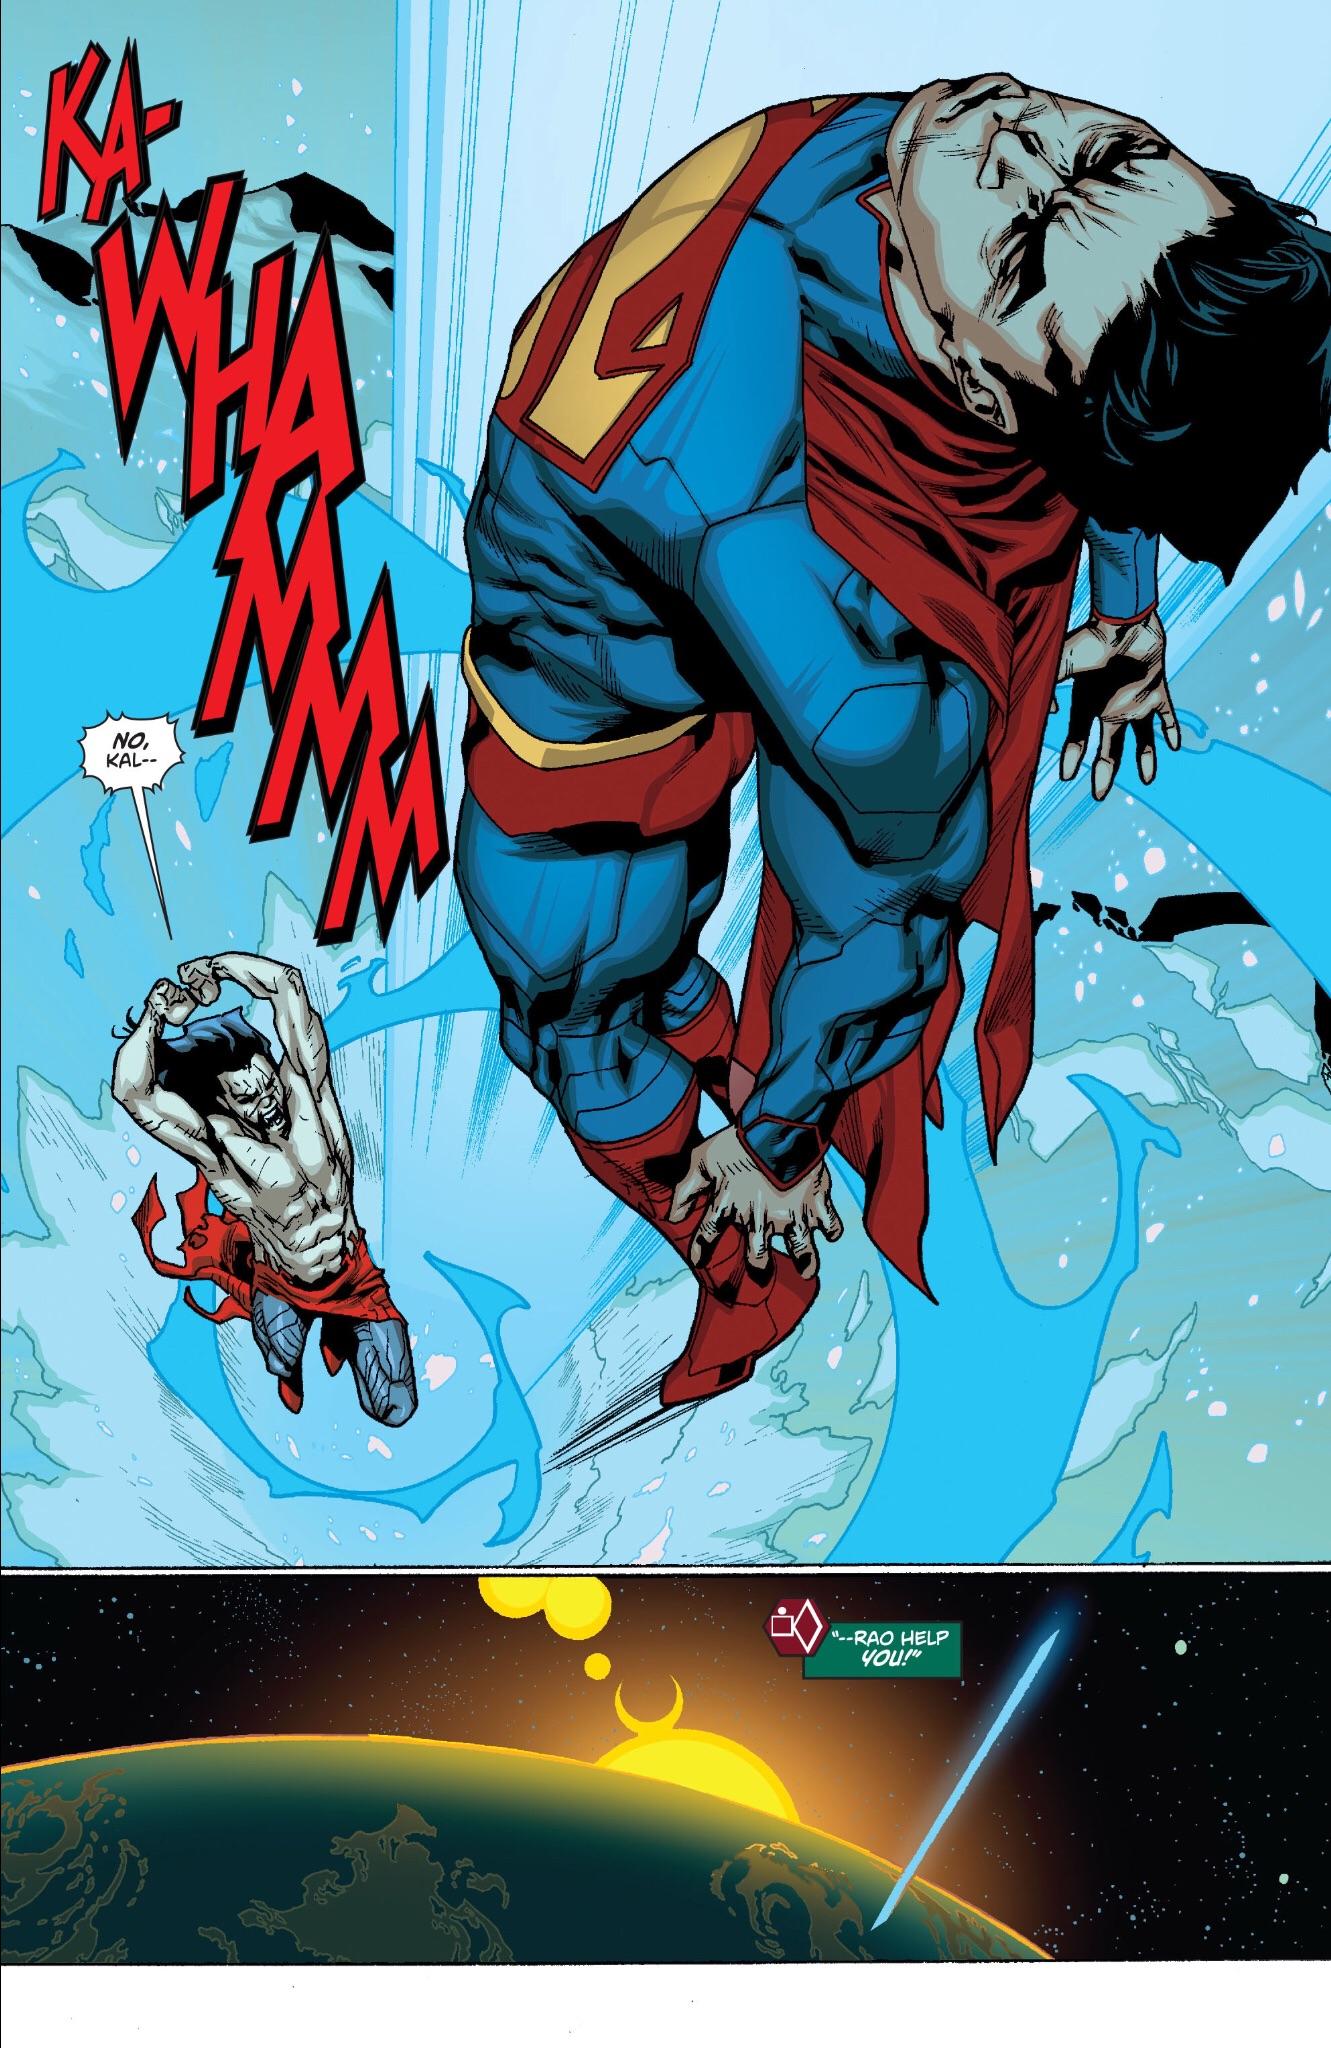 Found a funny coloring error in supergirl new new superman with the trunks rdcics